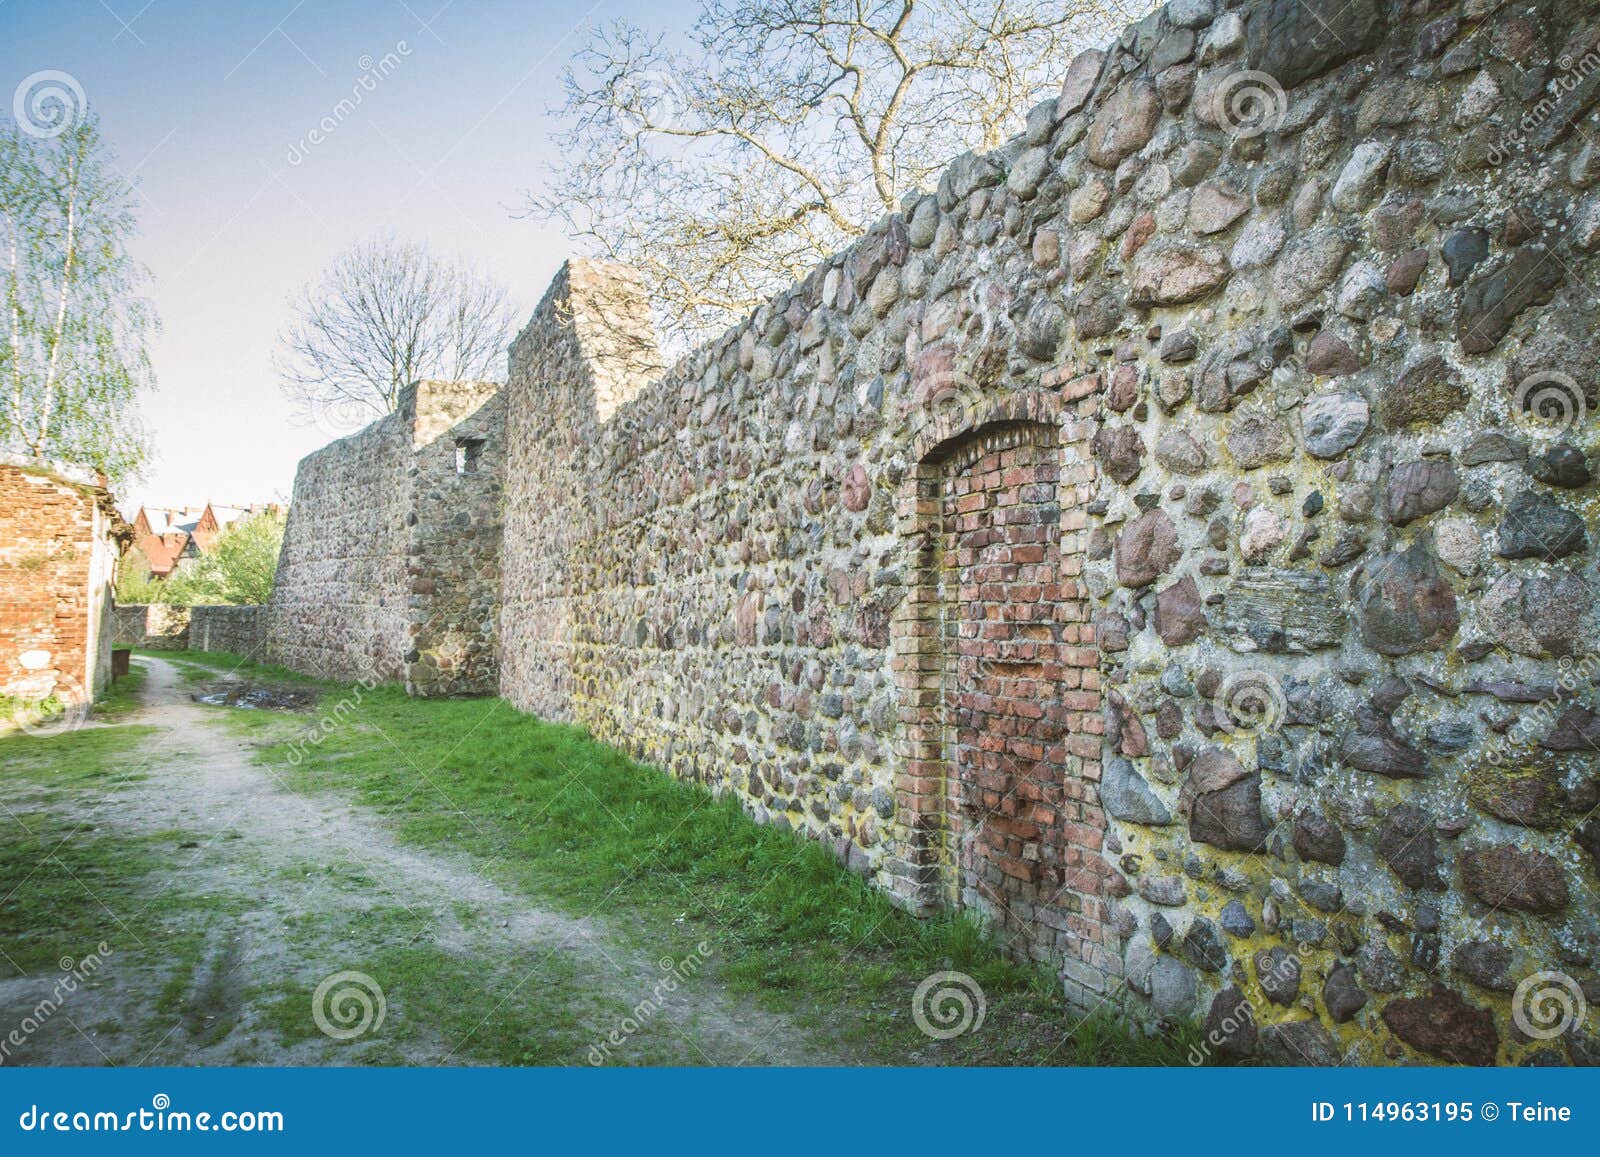 the xiii century defensive wall